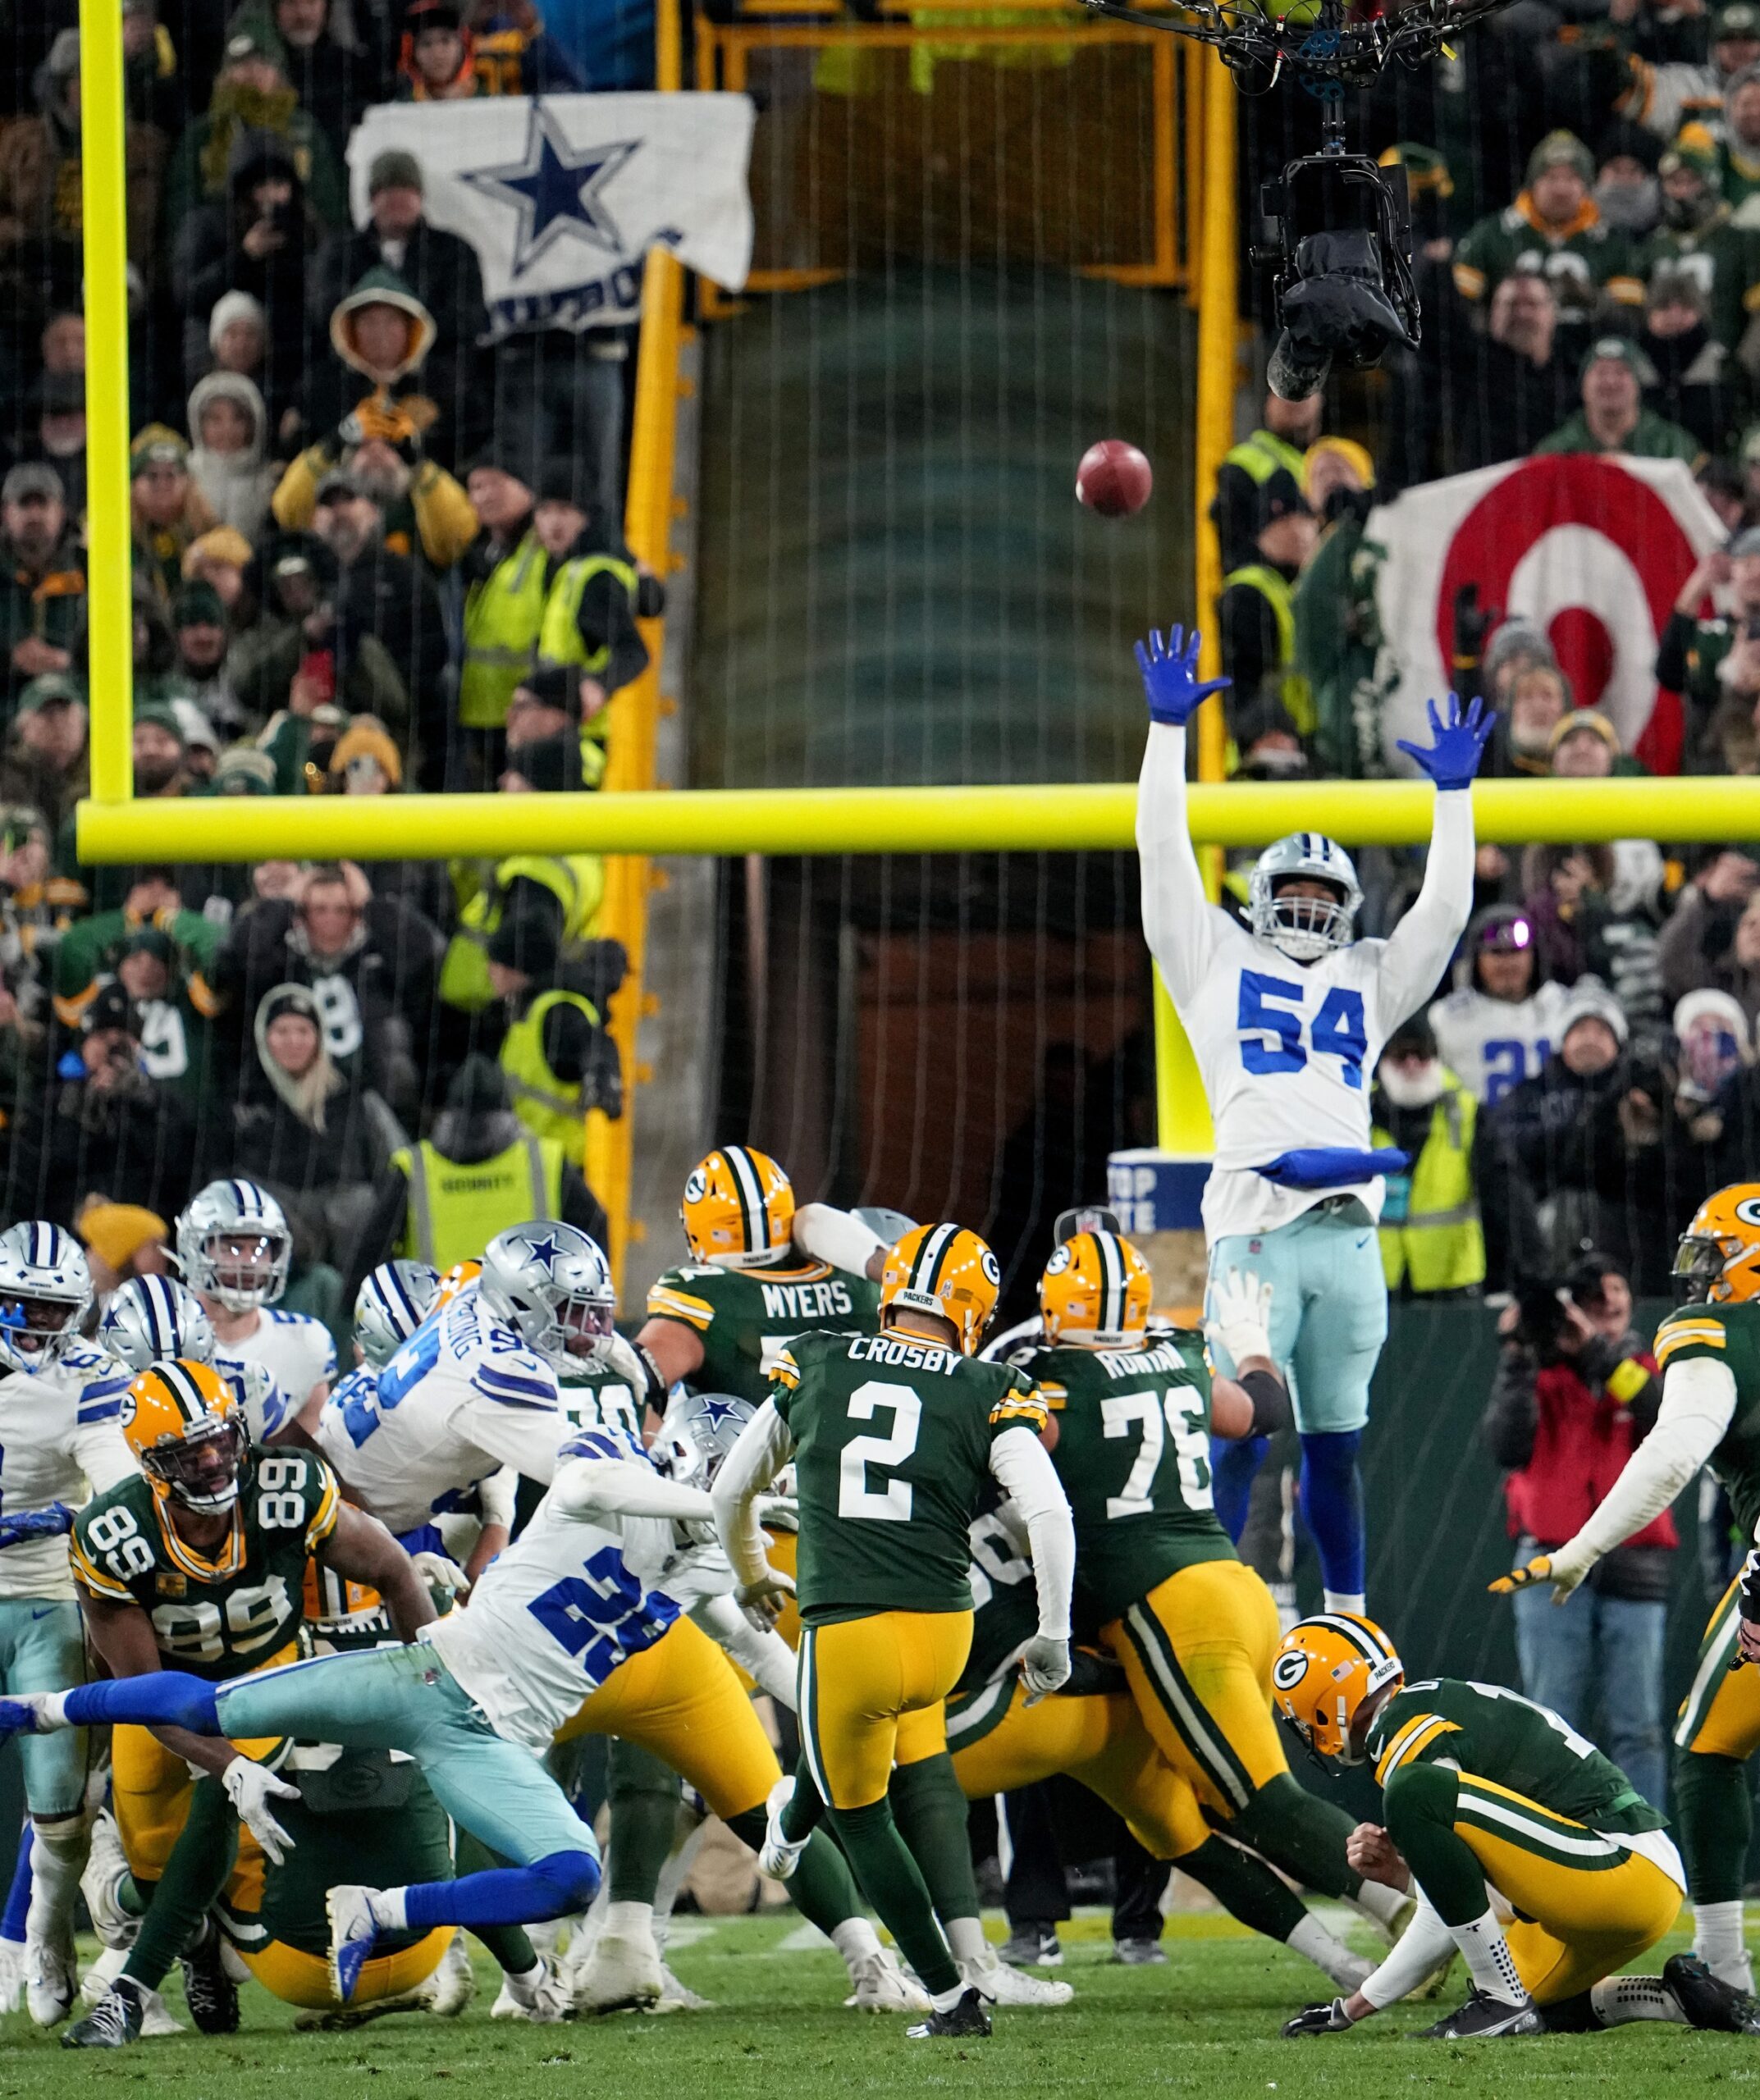 Mason Crosby kicks the game-winning field goal for the Green Bay Packers against the Dallas Cowboys